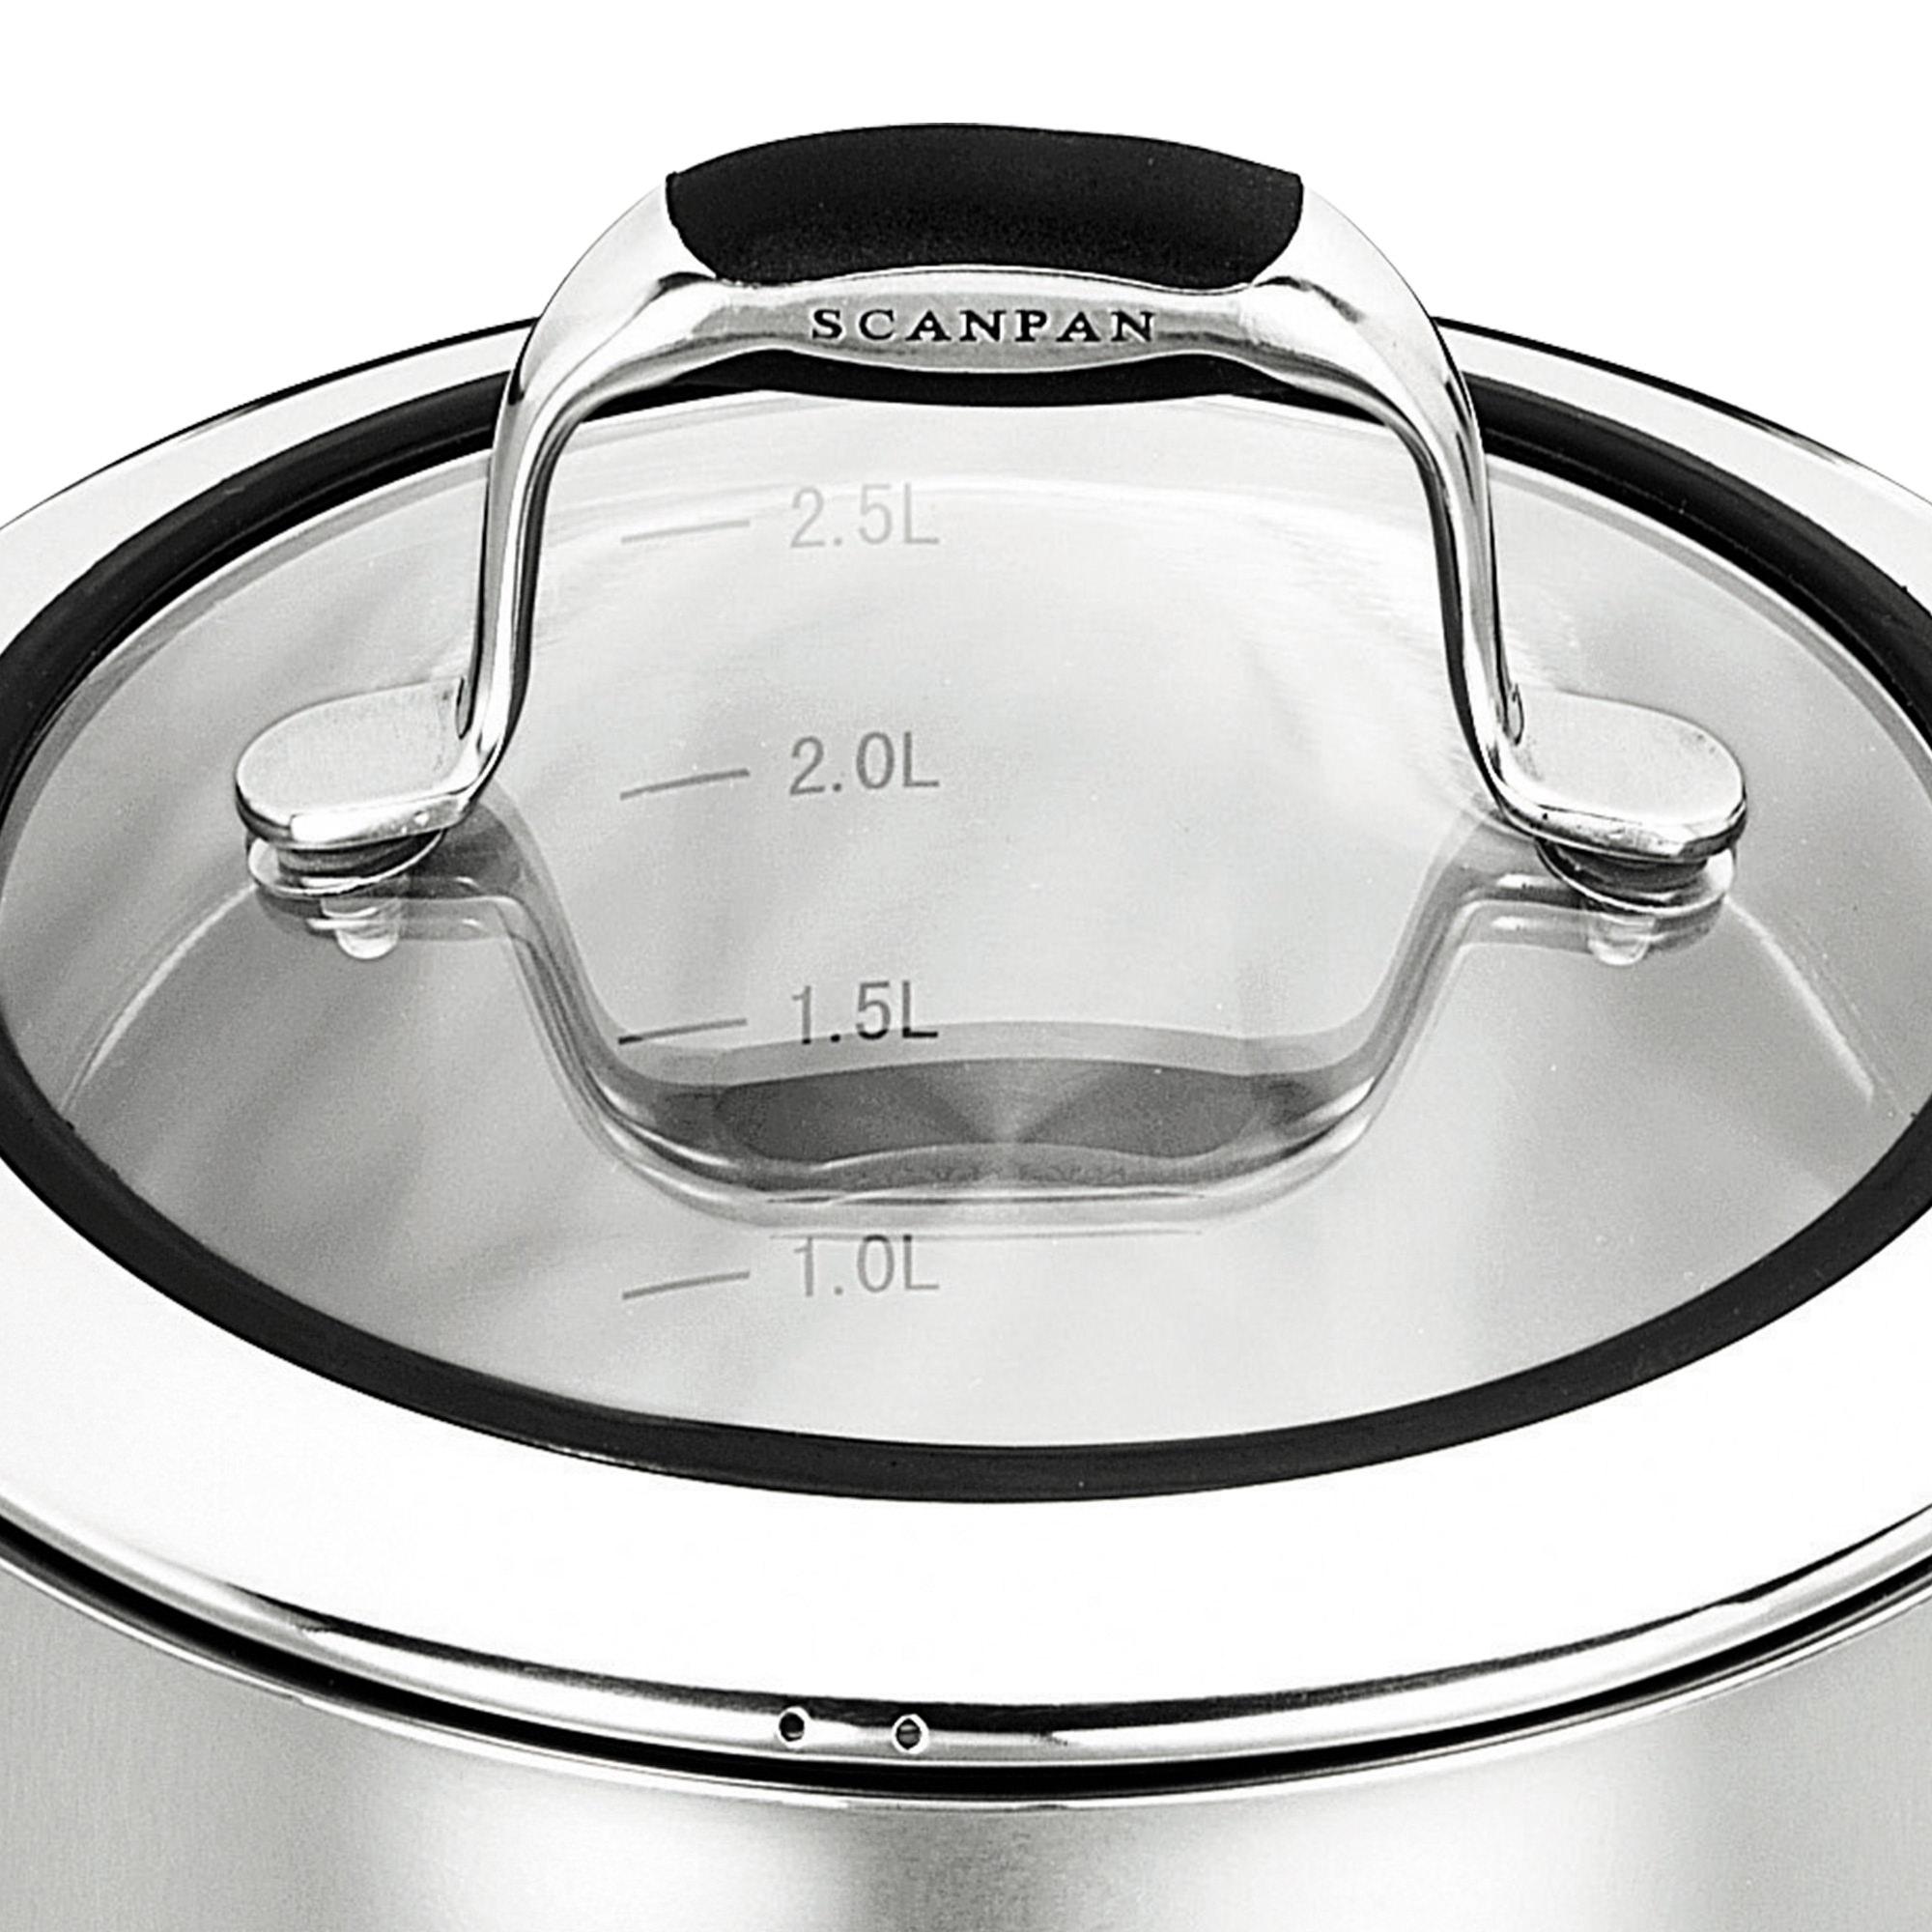 Scanpan Coppernox Stainless Steel Covered Saucepan 18cm - 2.5L Image 2